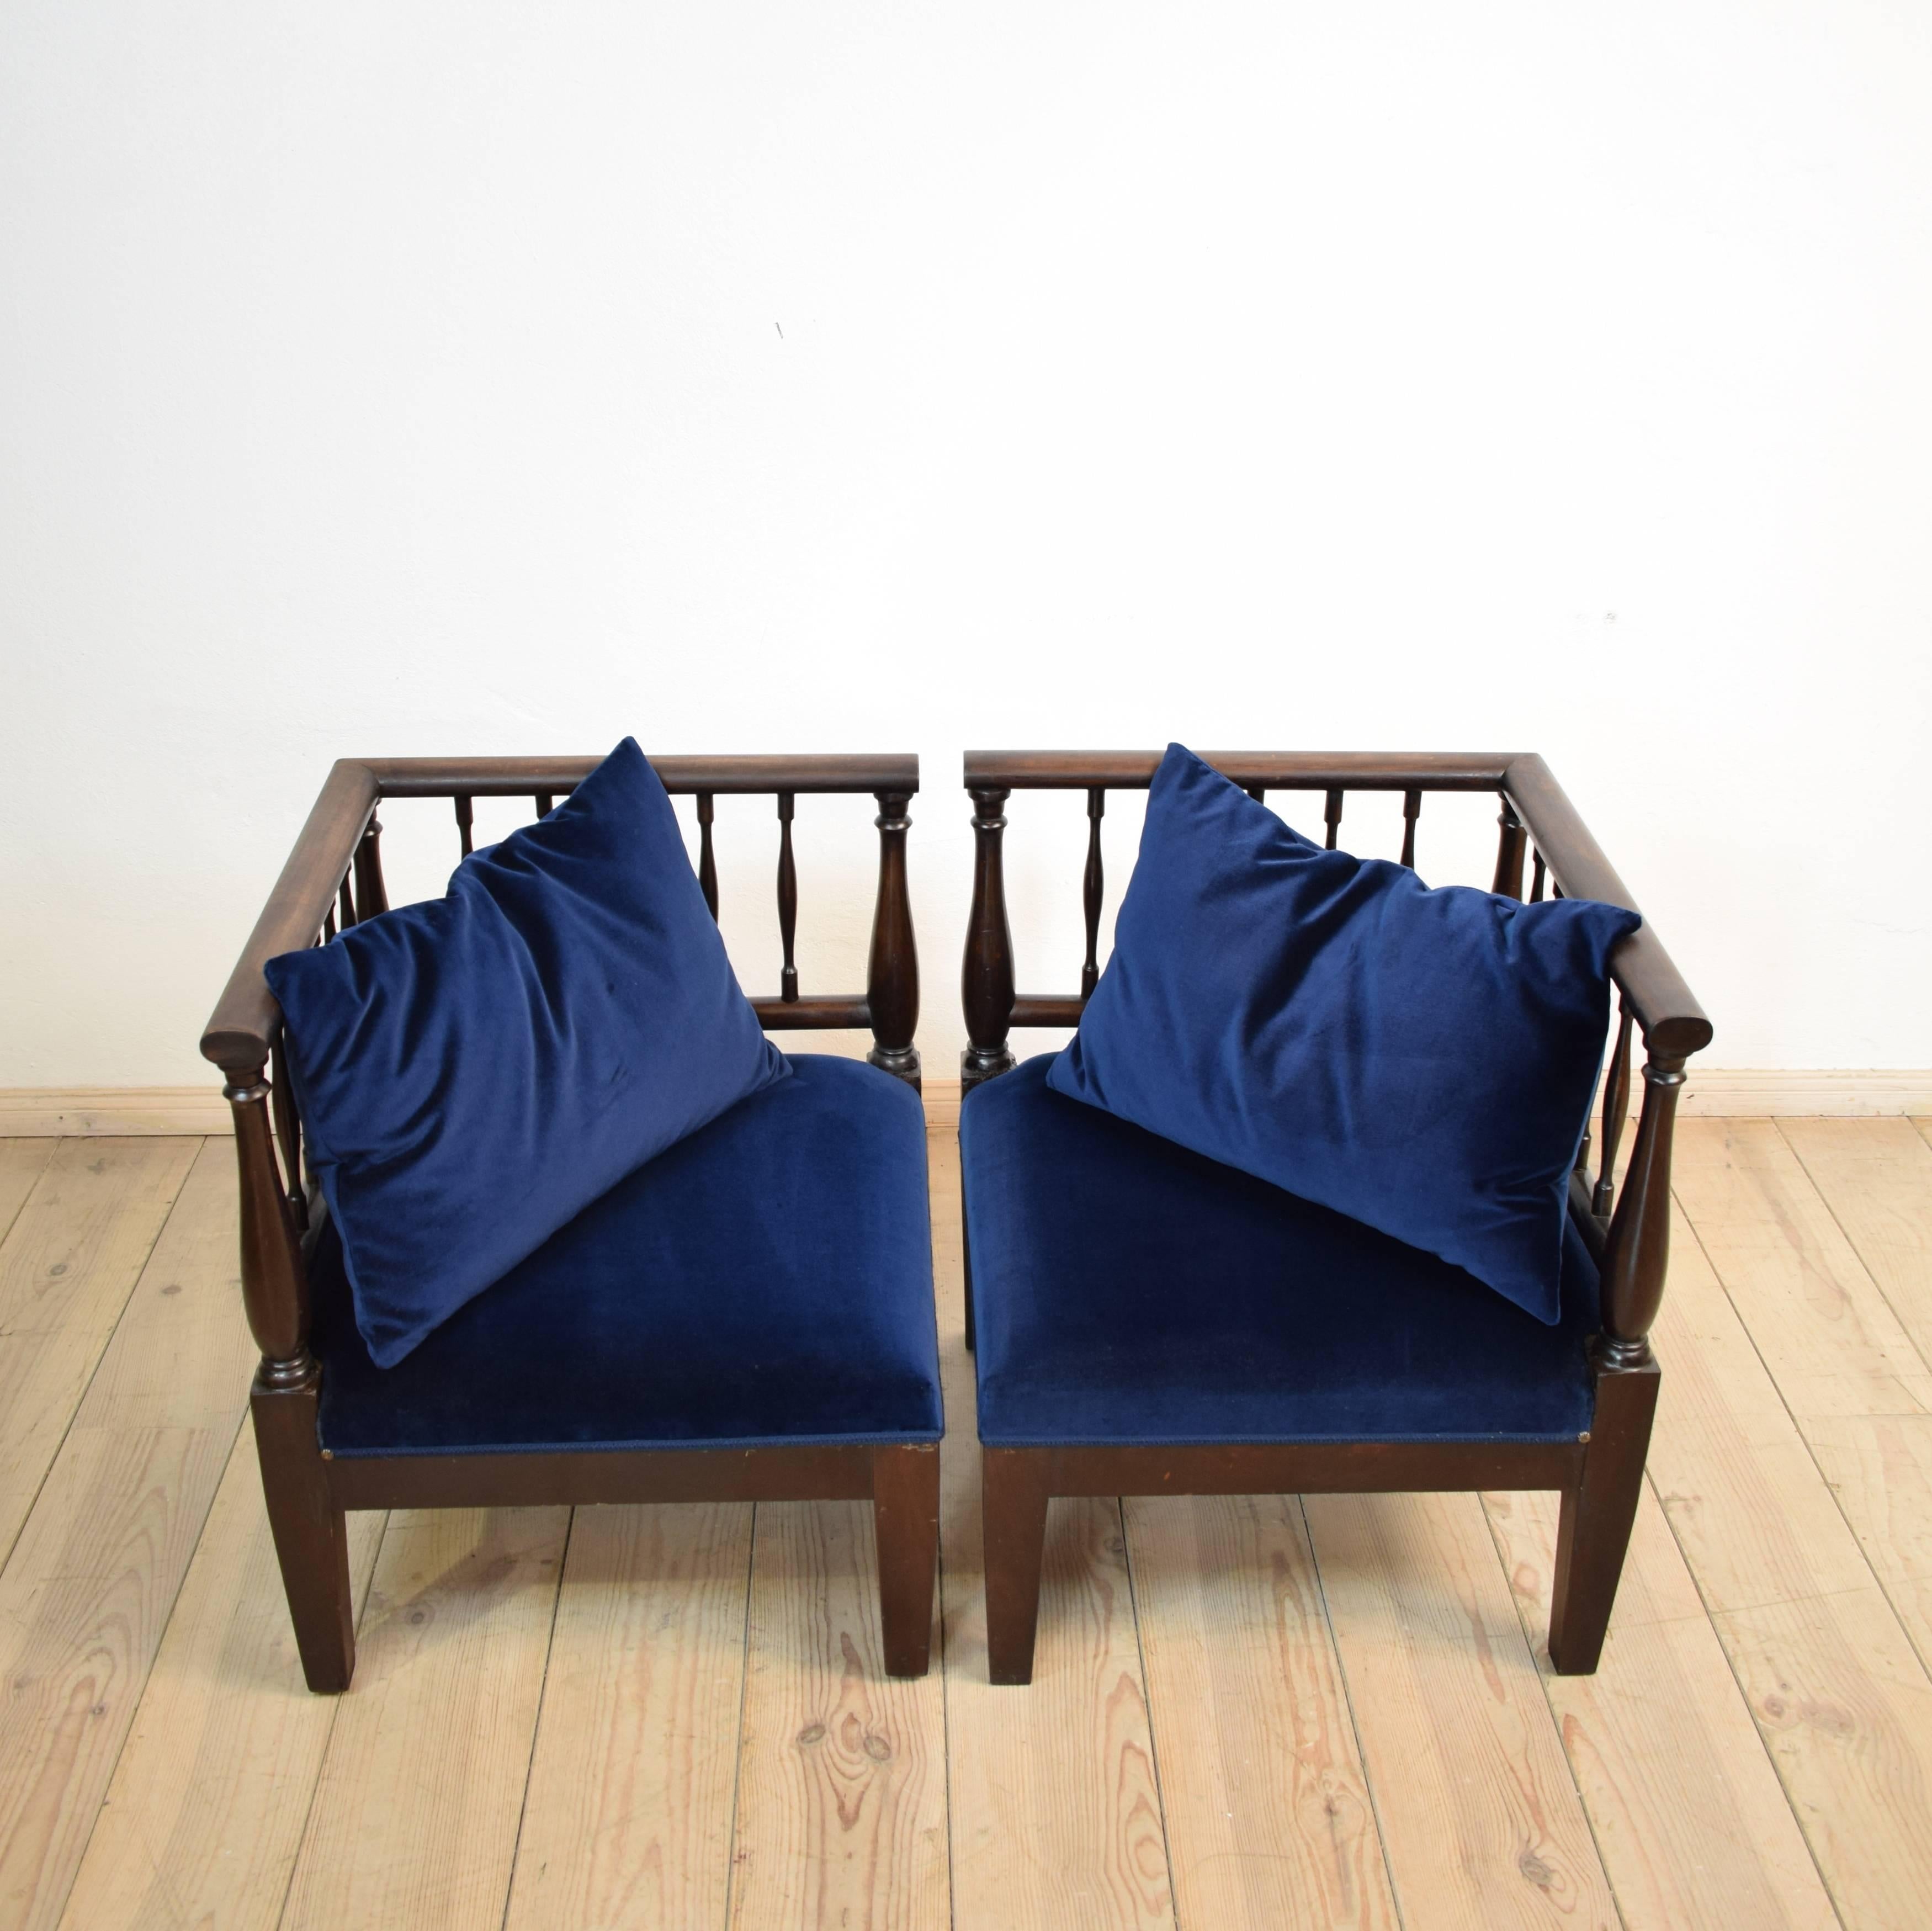 This 19th century pair of armchairs / loveseat is made out of mahogany and was re-upholstered in dark blue velvet. It comes with the matching pillows.
A very elegant and unique piece of furniture.